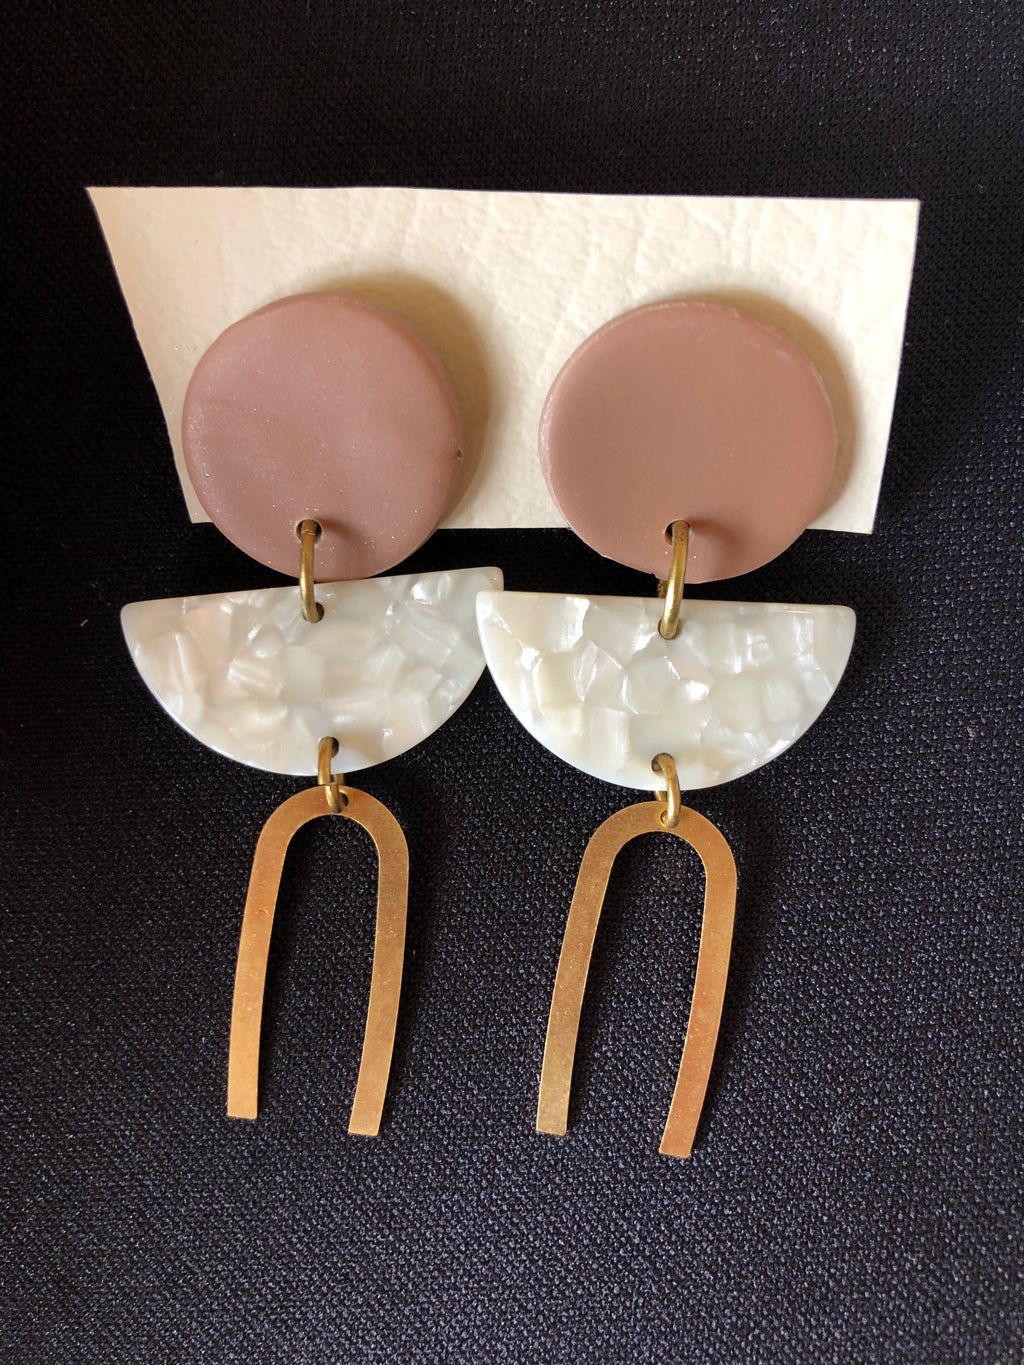 Clay Resin Brass Earrings-accessories, earrings, jewelry, Made in the USA-Womens Artisan USA American Made Clothing Accessories